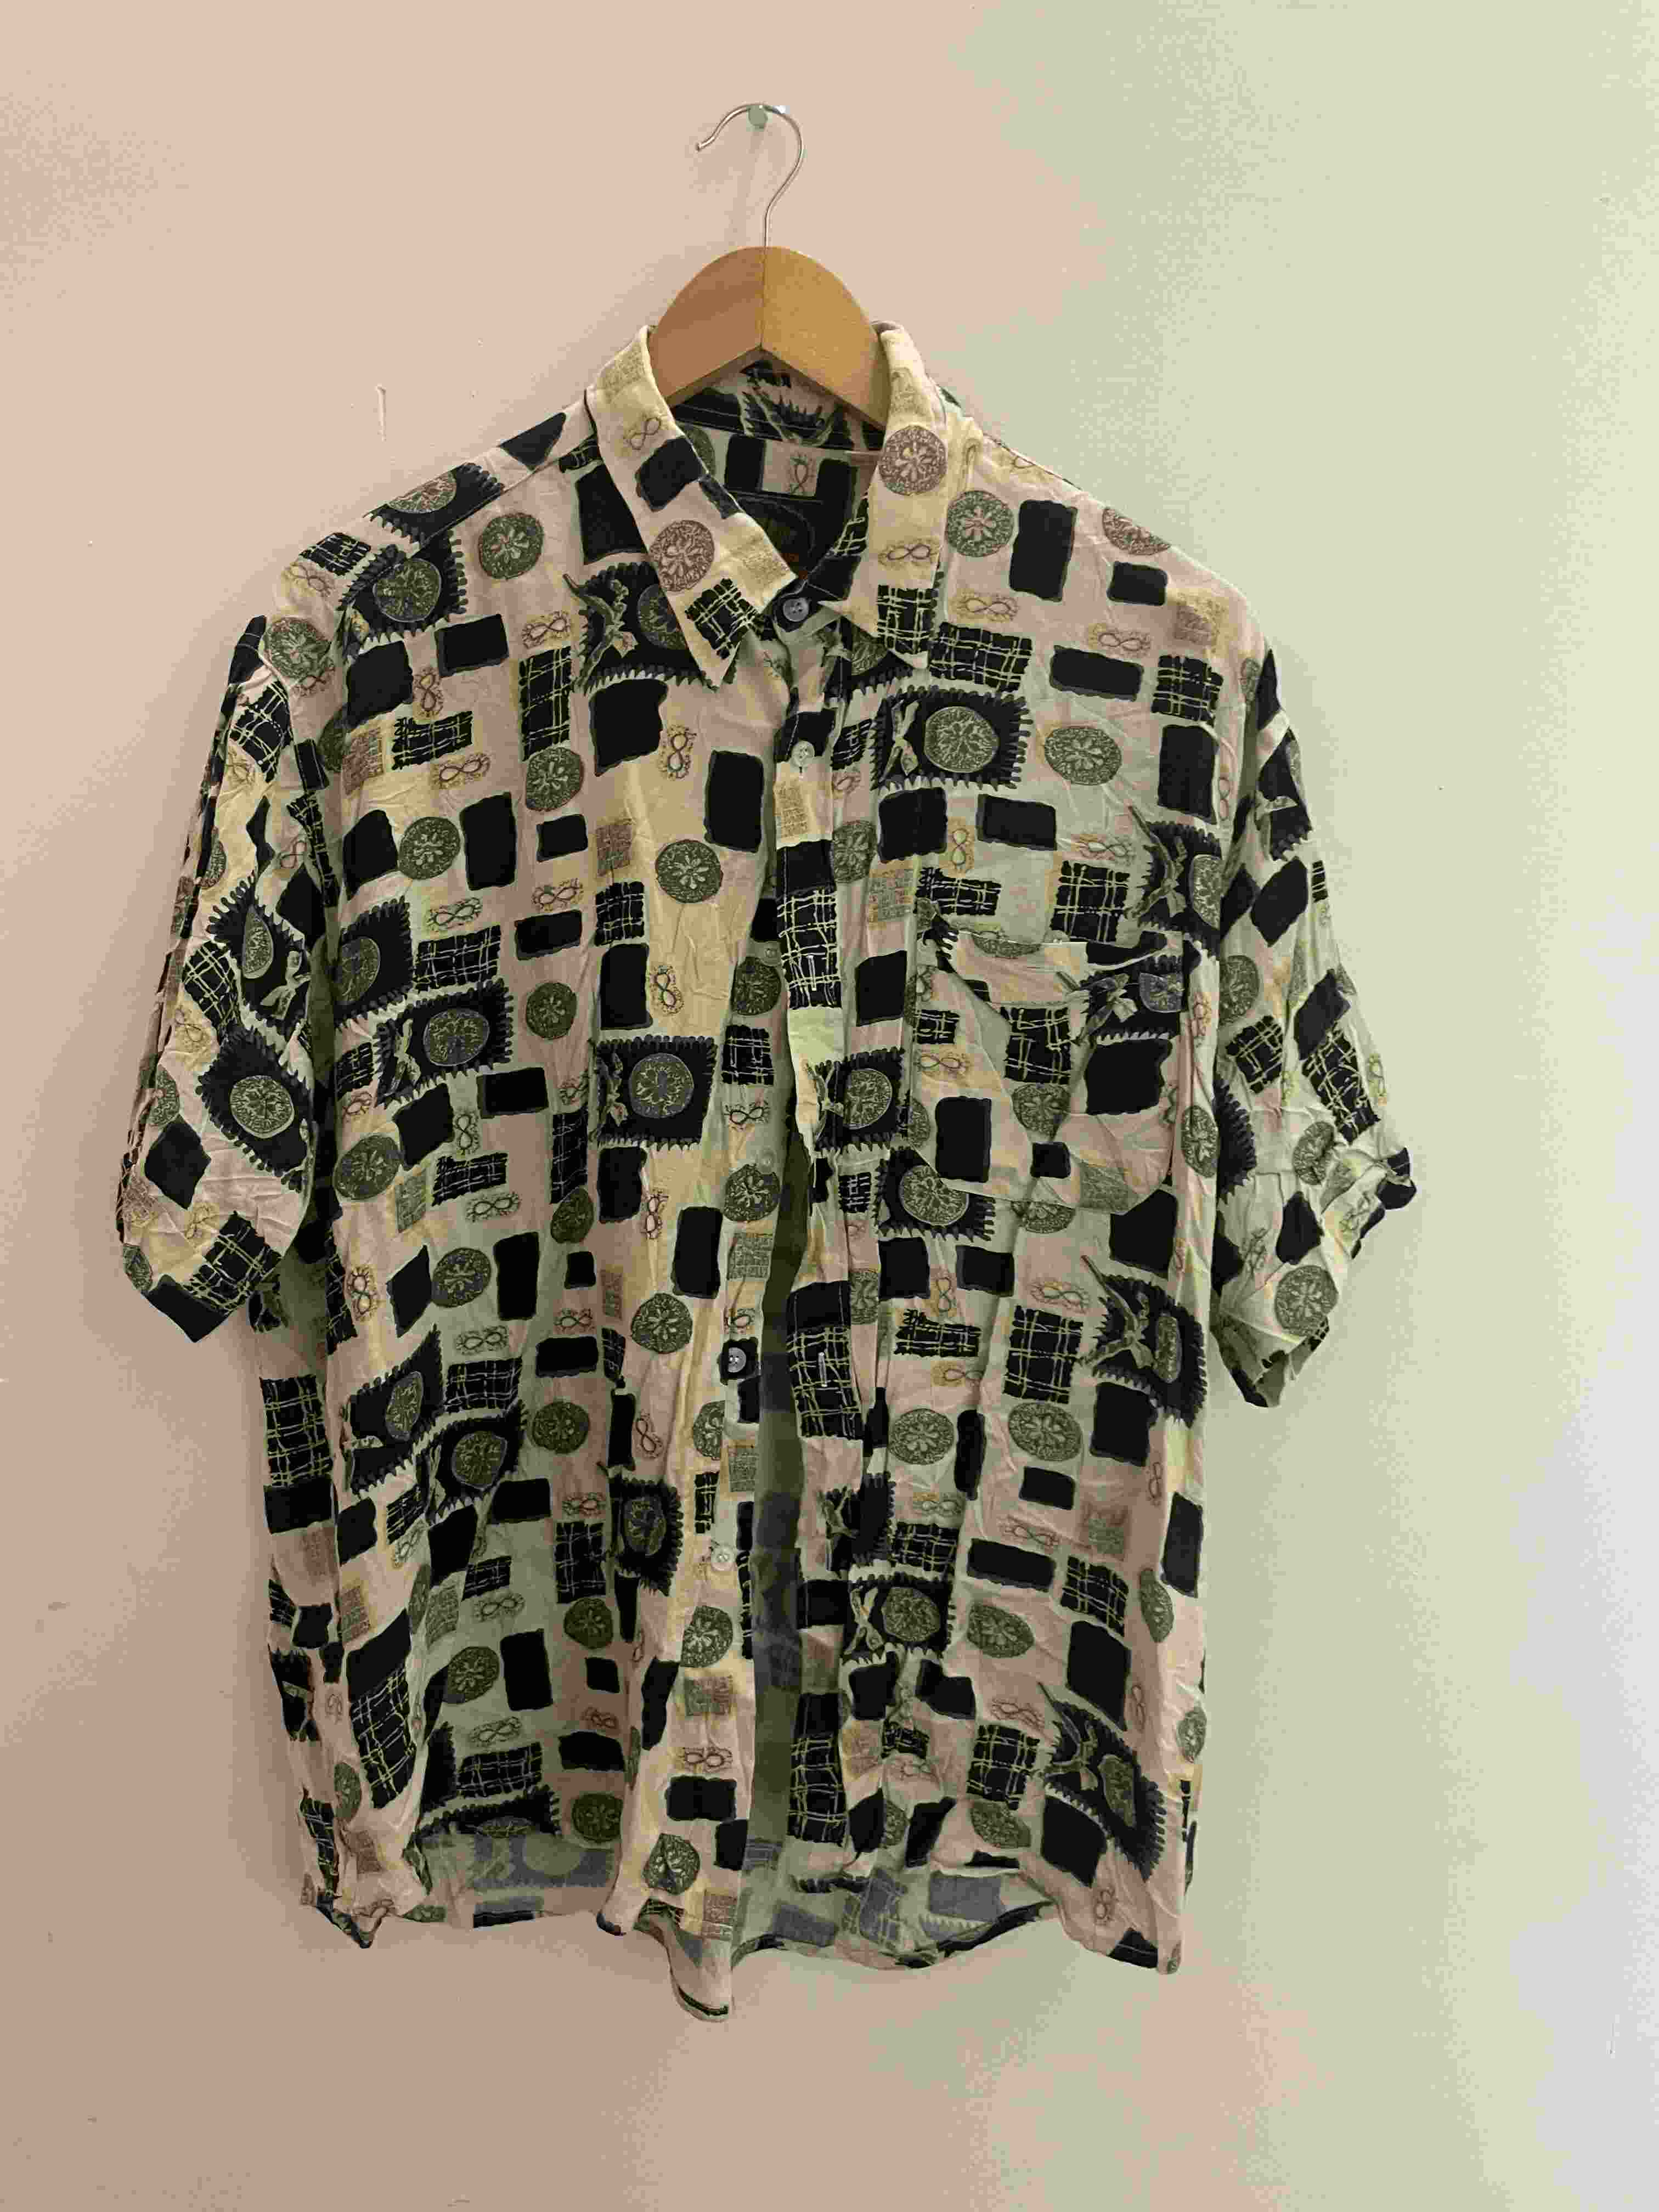 Vintage funny boy cream and black abstract pattern shirt size M